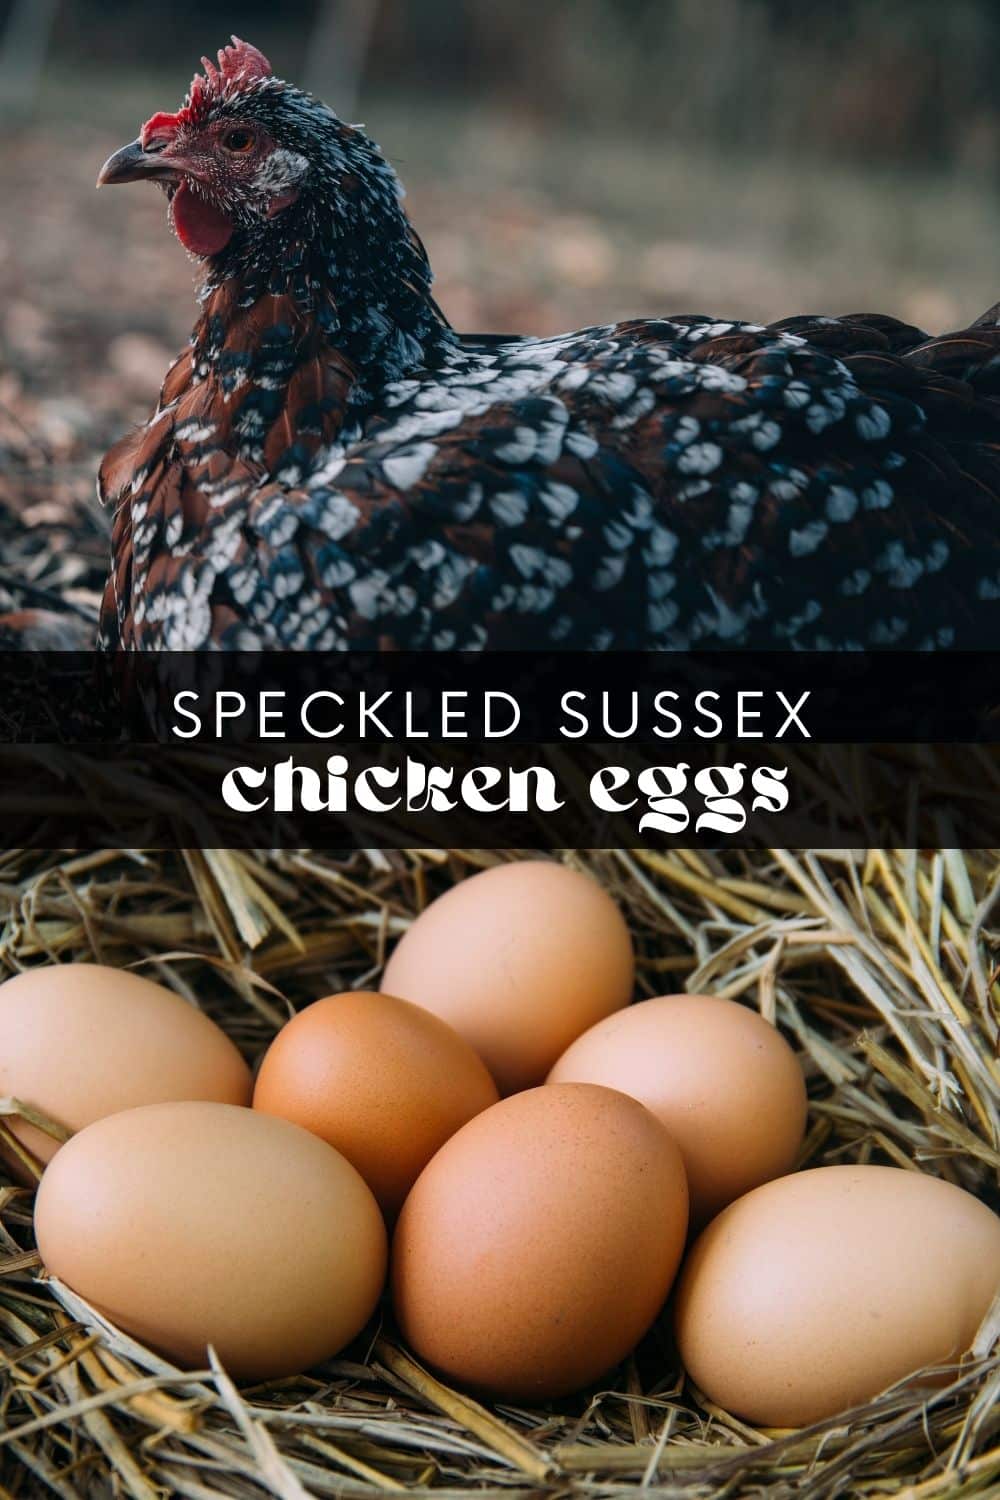 Take the guesswork out of chicken keeping with this comprehensive guide to speckled Sussex chickens. These large, friendly, and docile birds could just be the perfect addition to your backyard flock! Learn everything you need to know about this breed from an experienced chicken keeper.